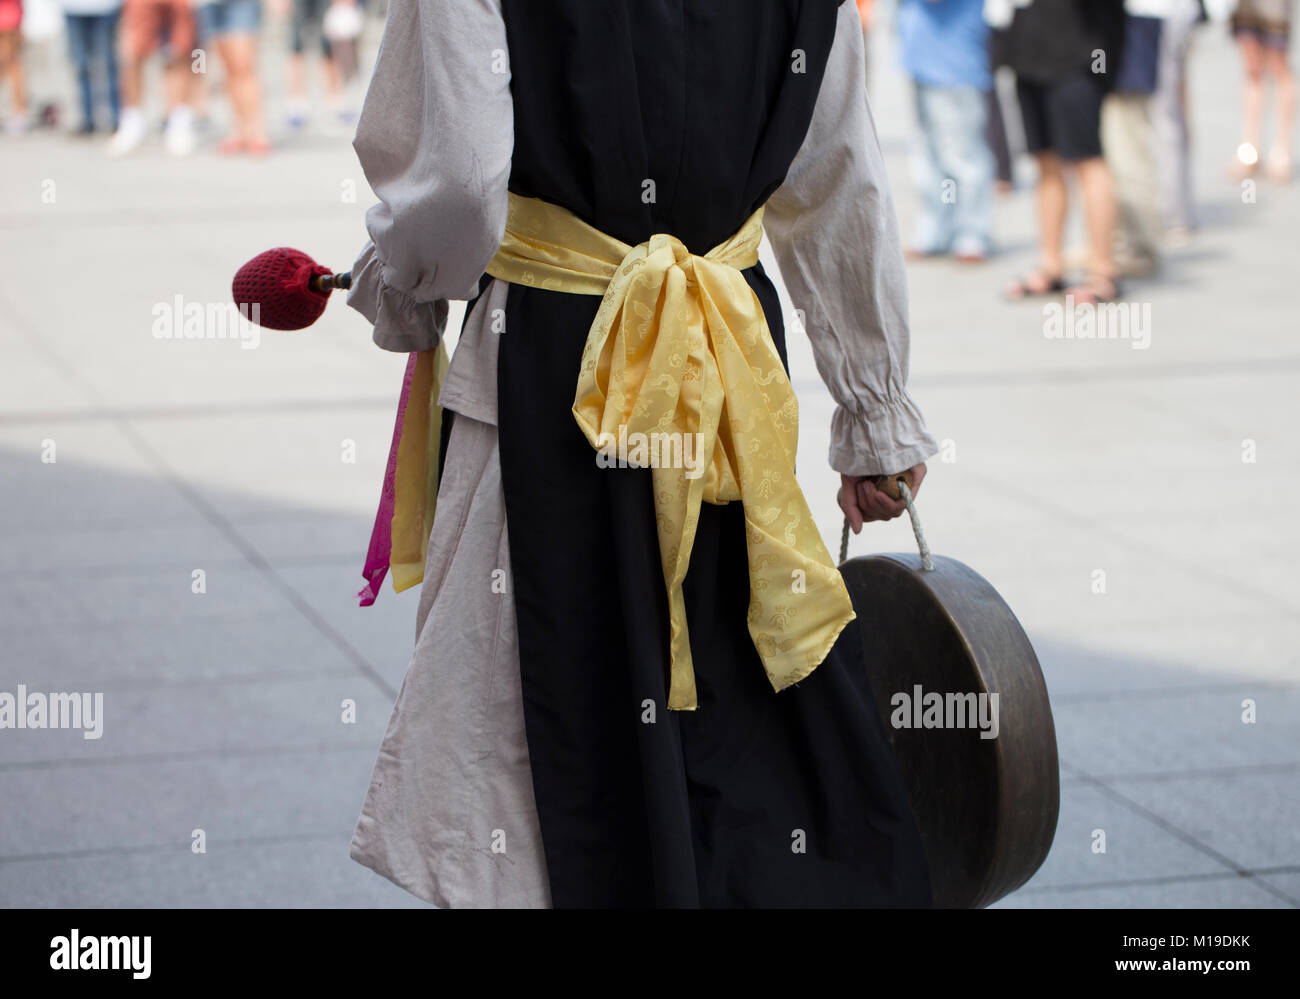 Rear view of a man of a traditional korean music/dance group Stock Photo